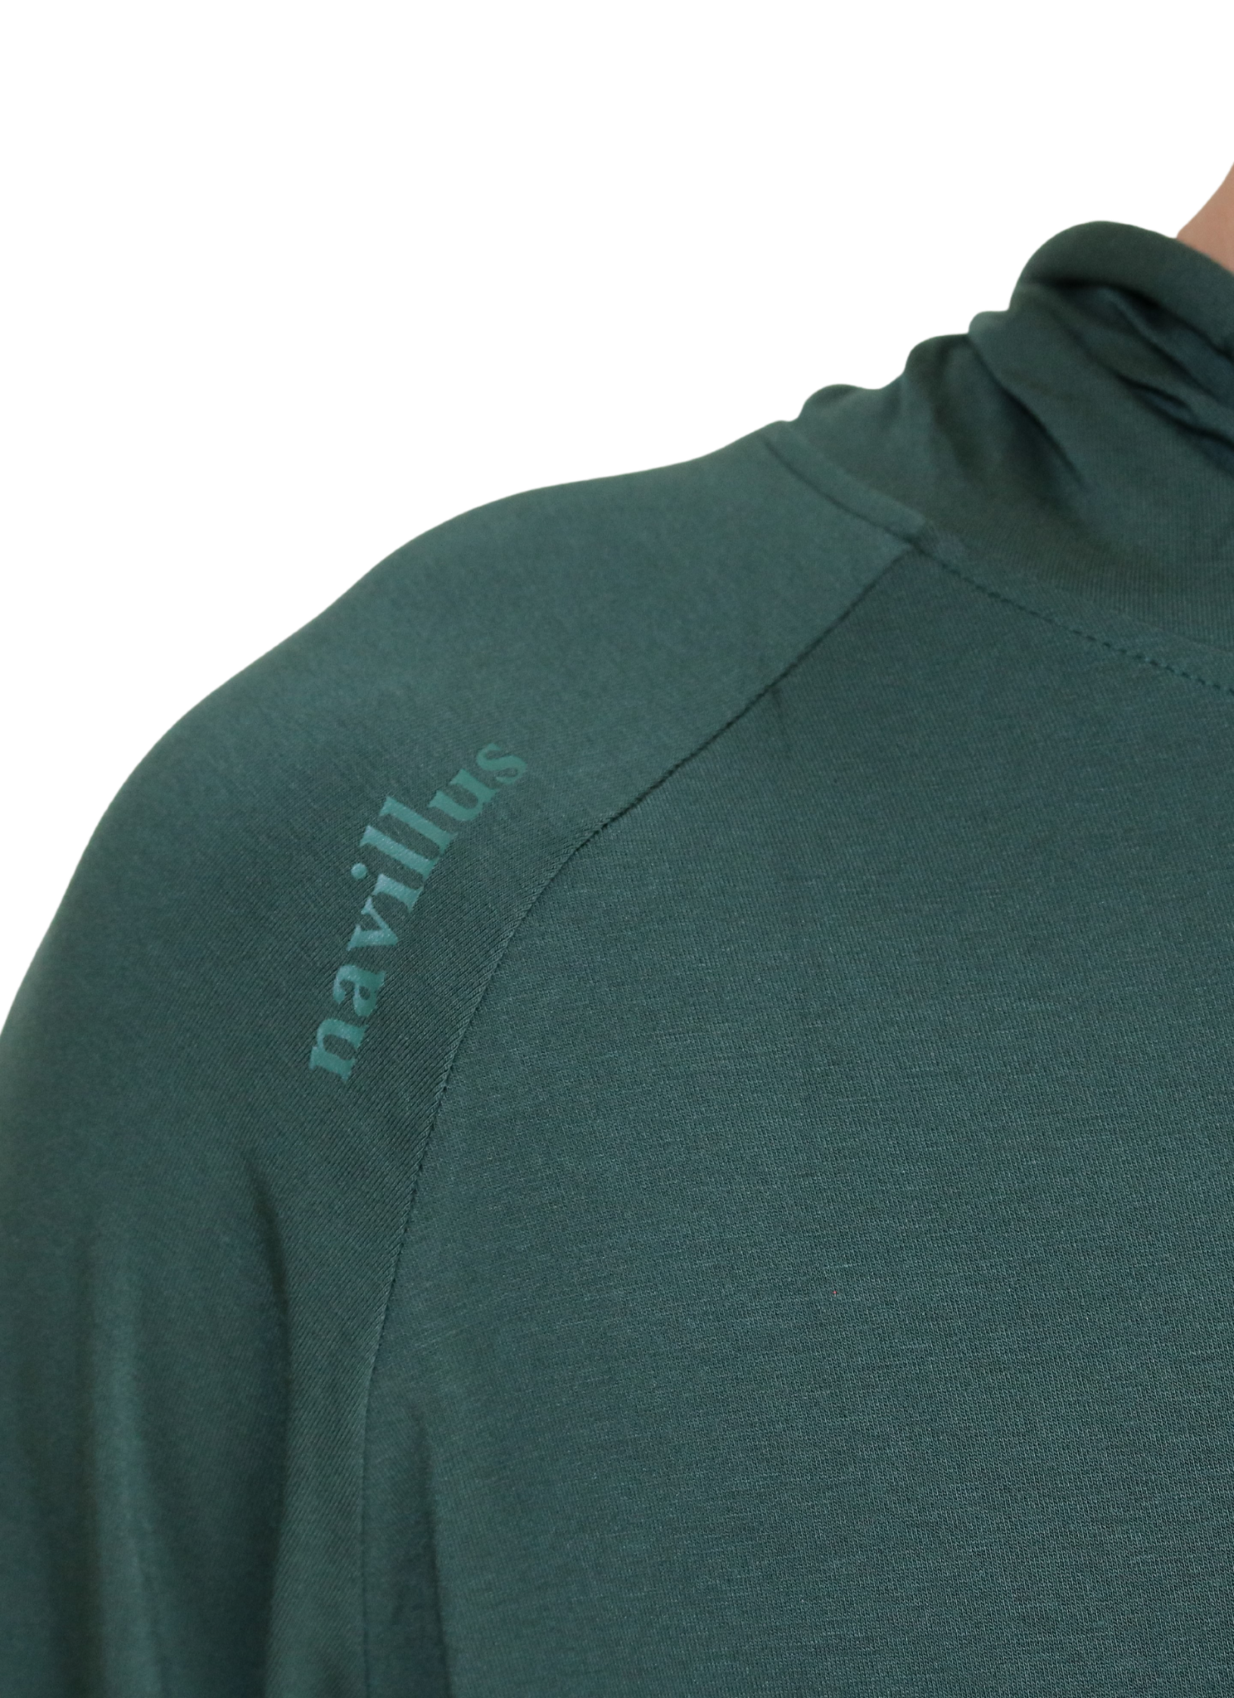 Front logo of the Cruiser Midweight Bamboo Hoodie in Deep Green.